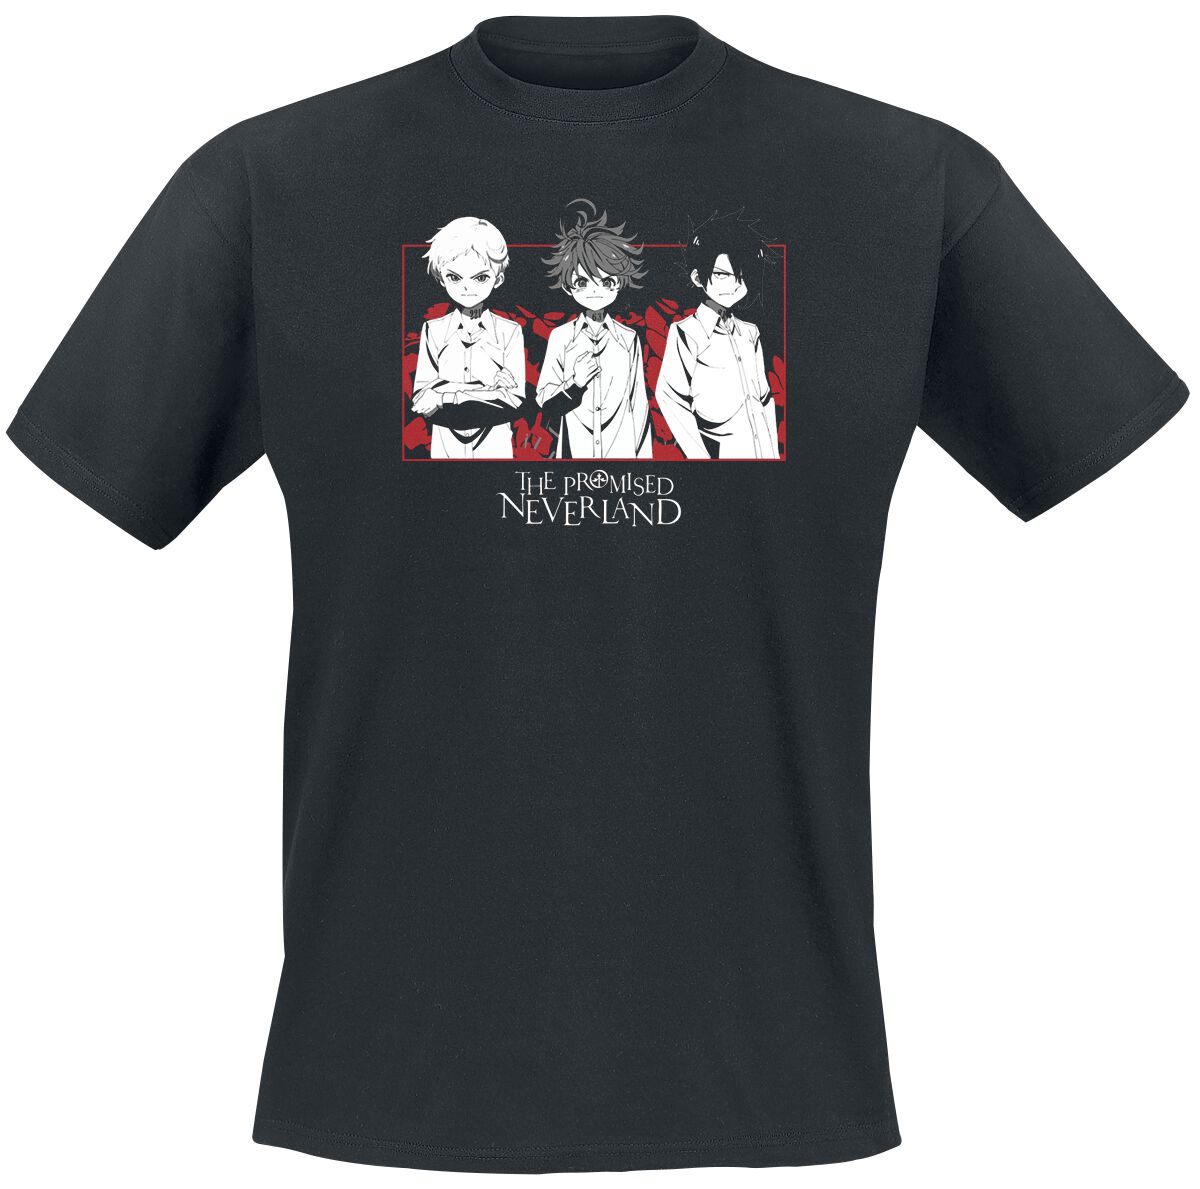 The Promised Neverland Emma, Norman T-Shirt schwarz in XL